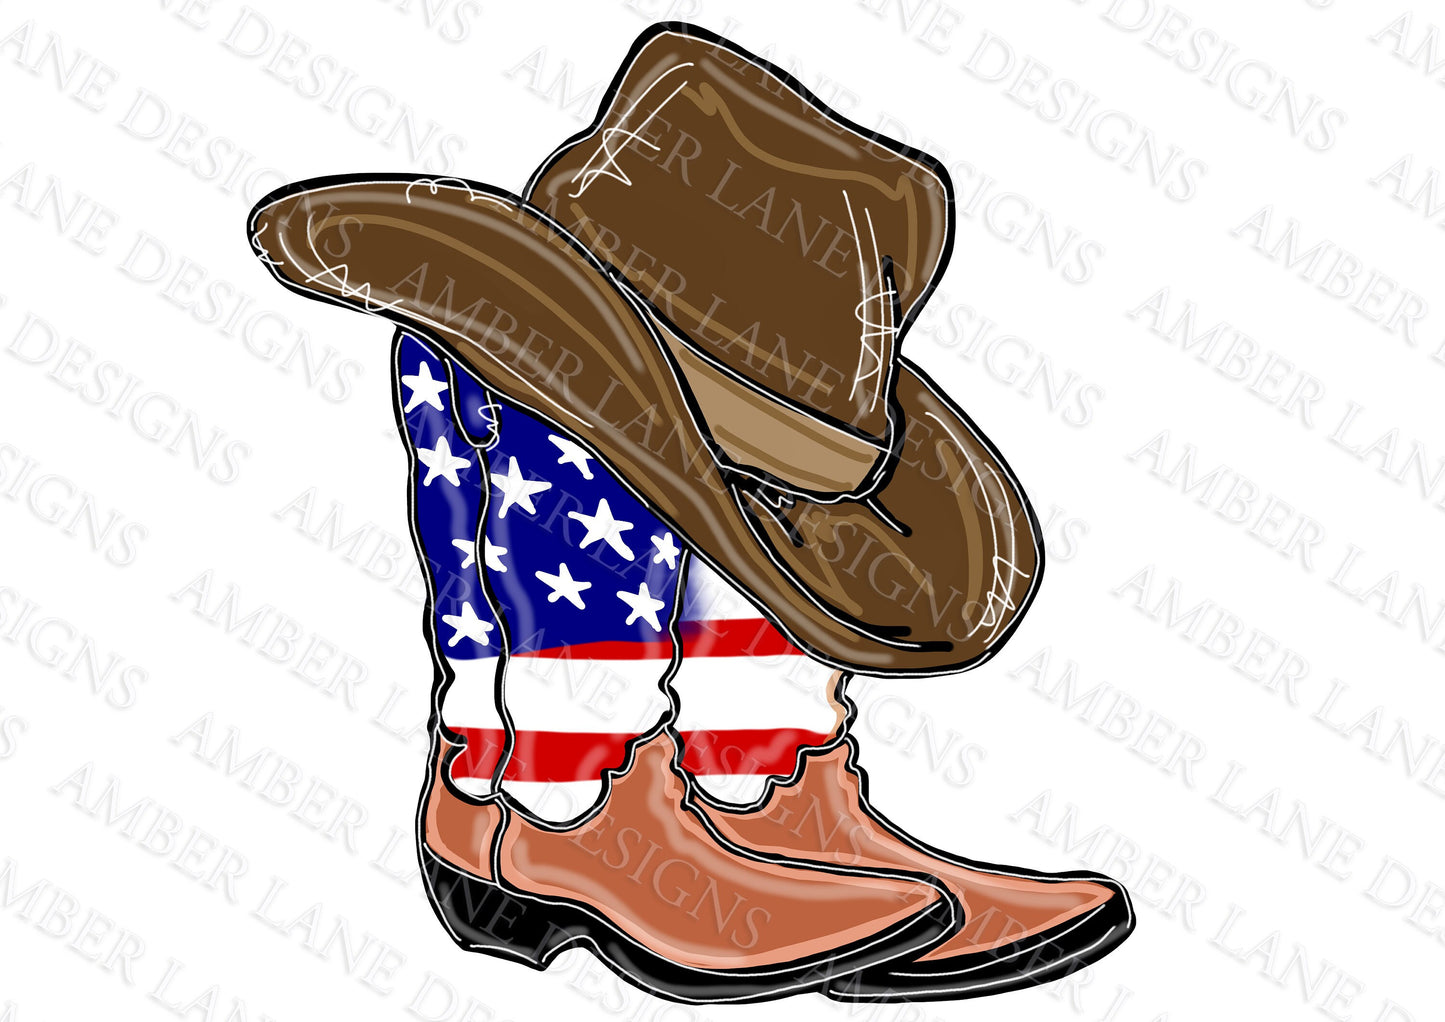 Rustic Patriotism: Cowboy Boots USA with Hat On Top Design Boot Scootin' Independence Red, White, and Rodeo